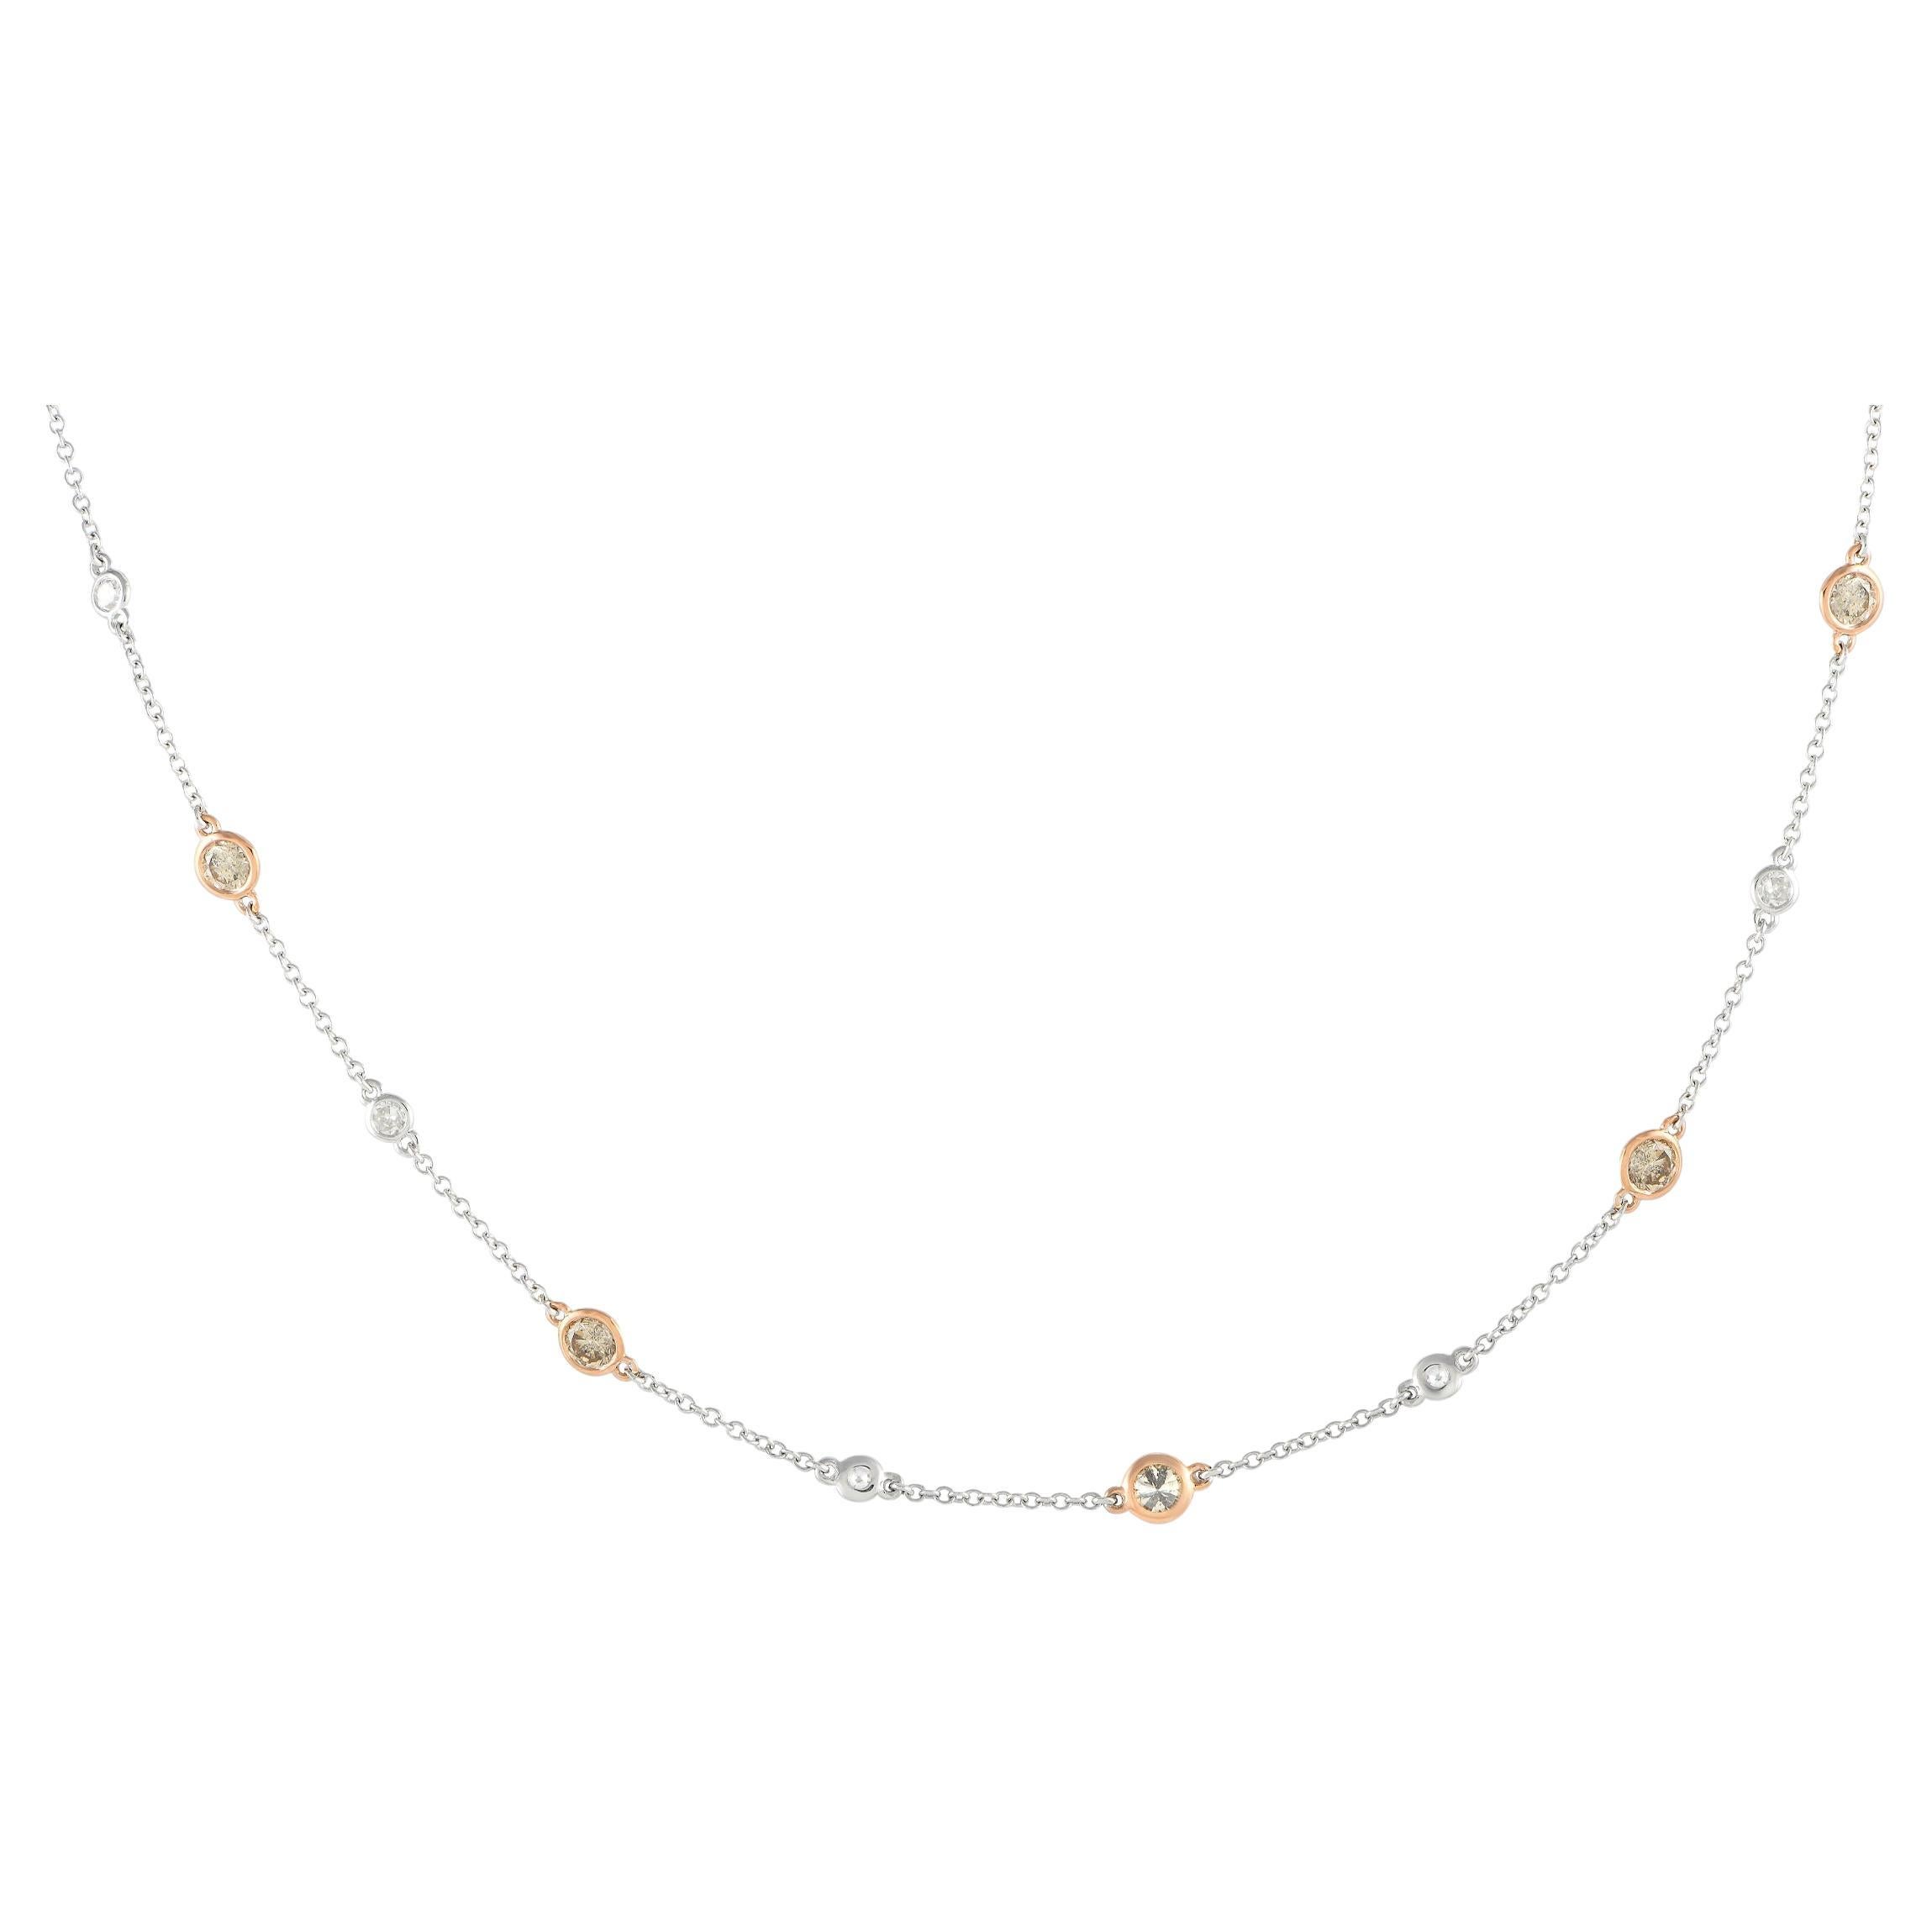 LB Exclusive 14K White and Rose Gold 3.23ct Diamond Station Necklace